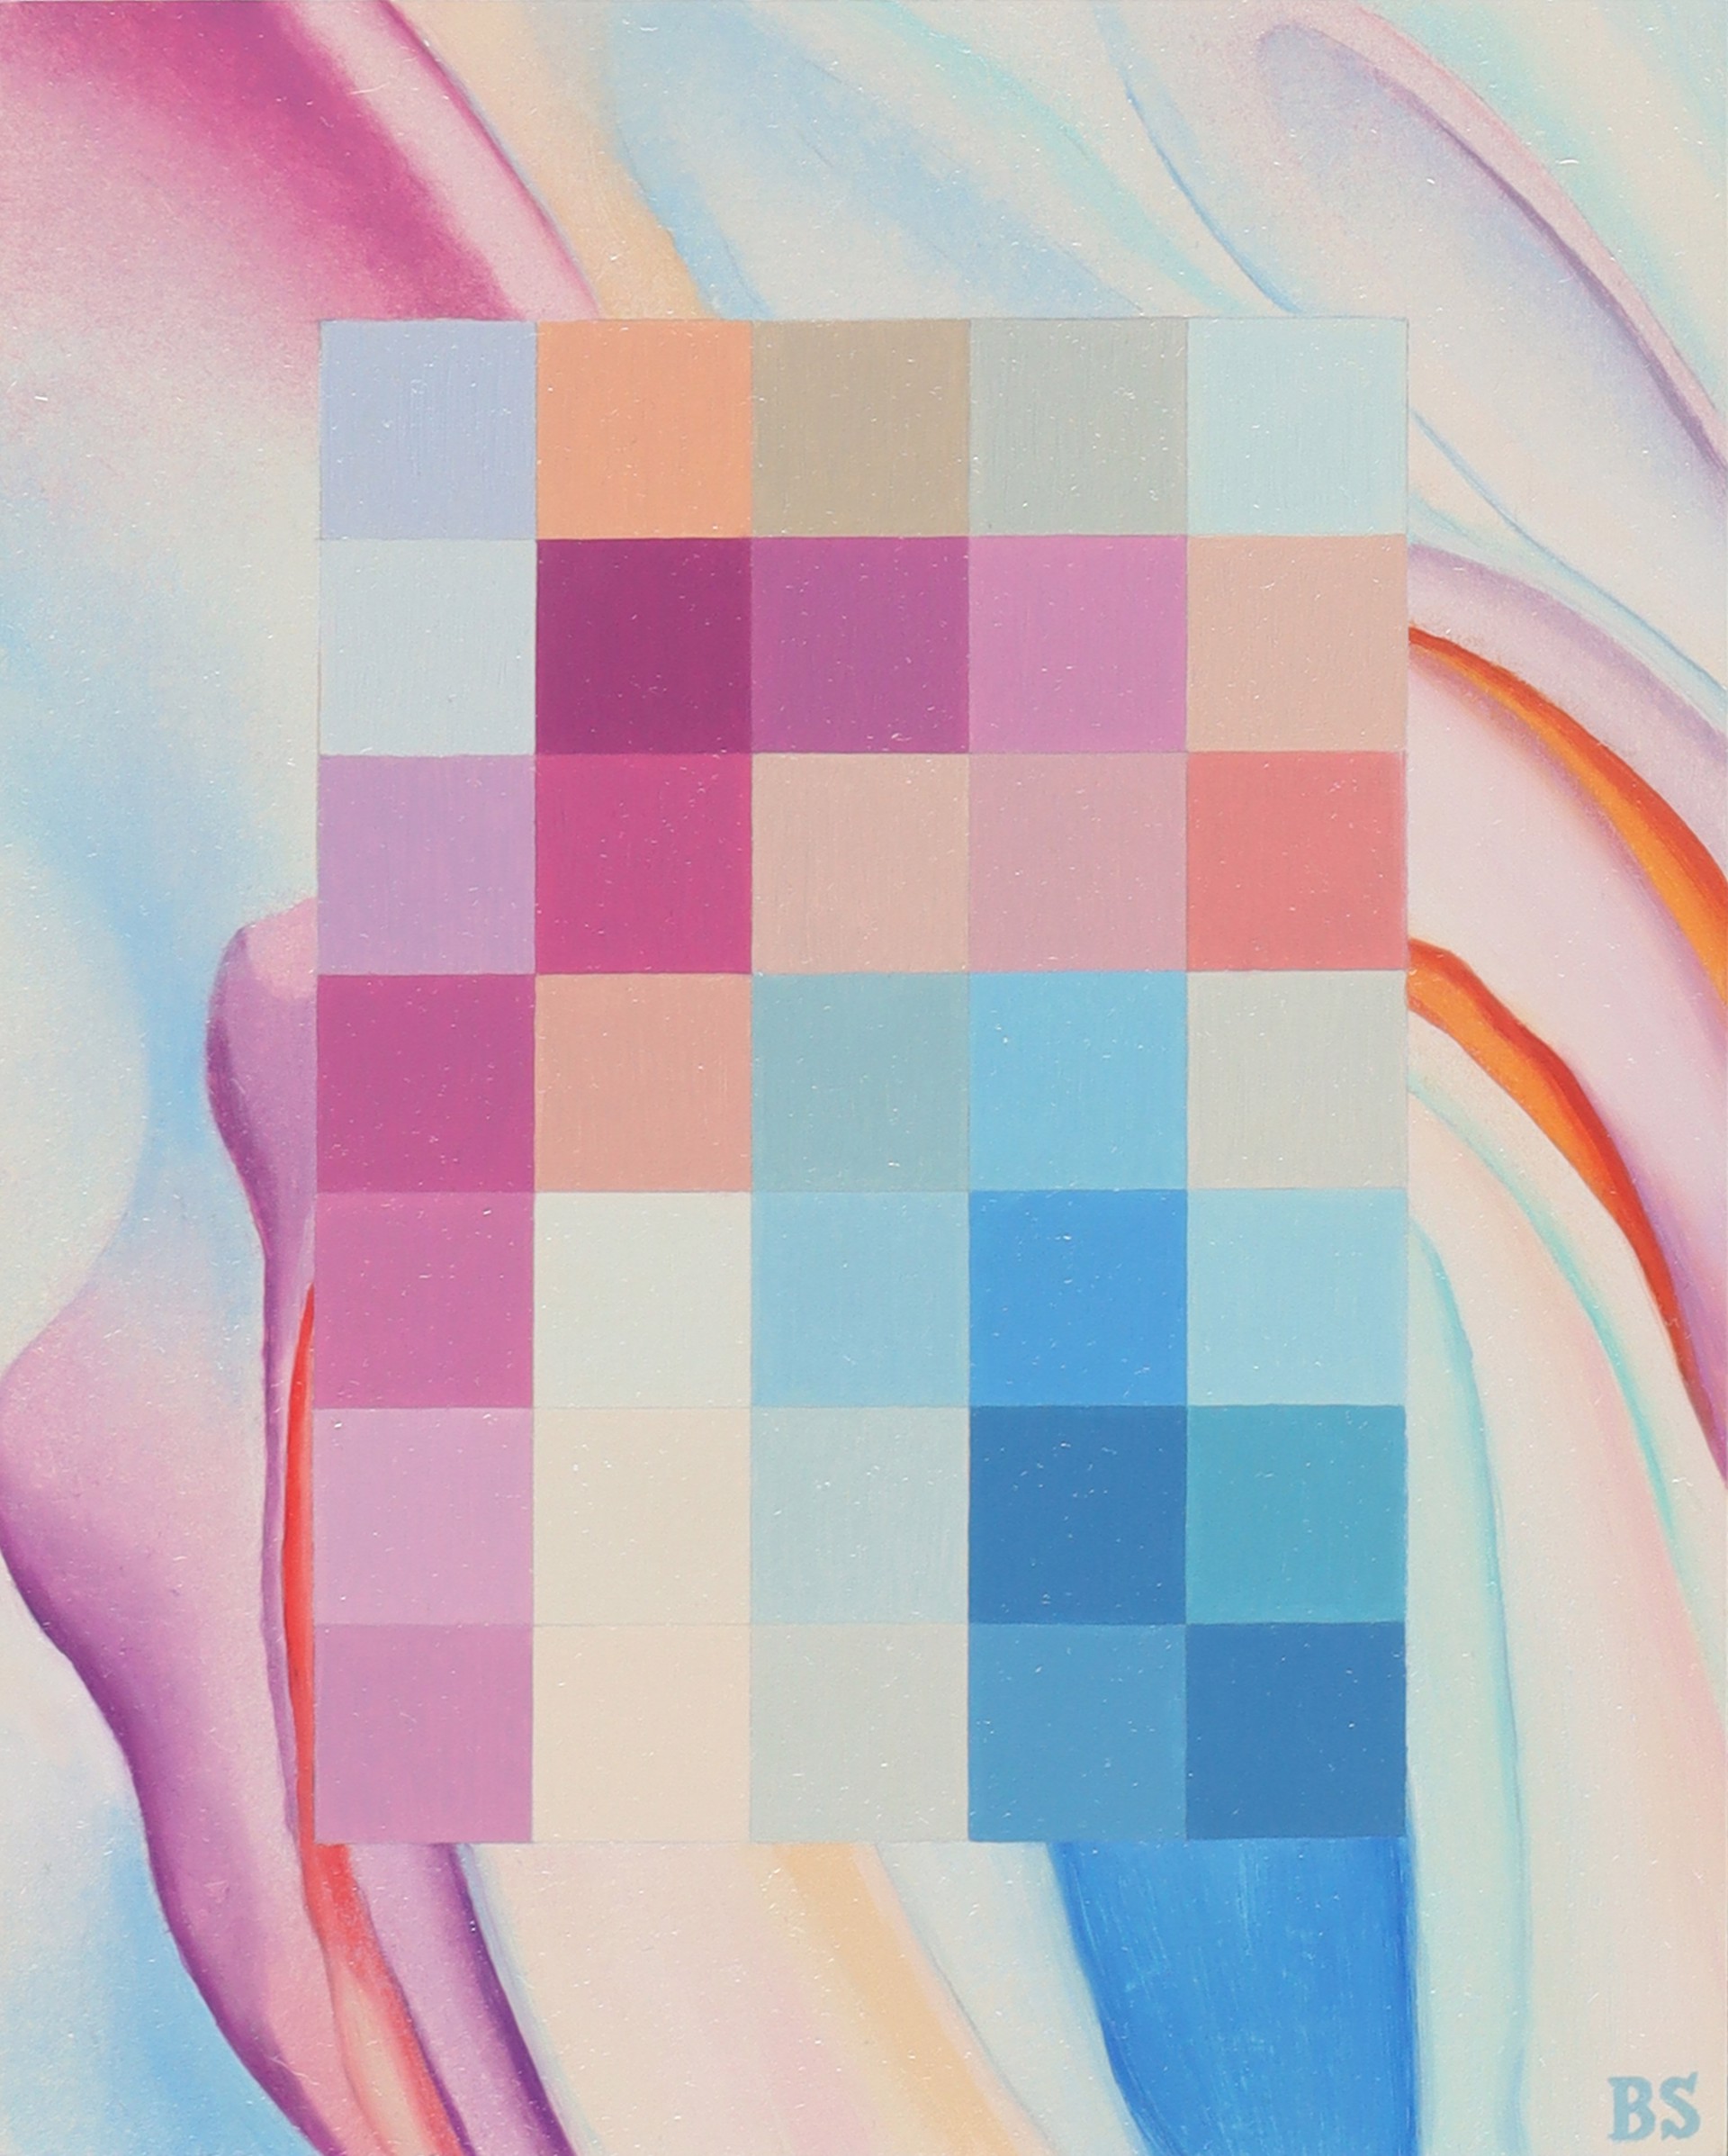 Censored:  Pink & Blue No. 2 by Ben Steele